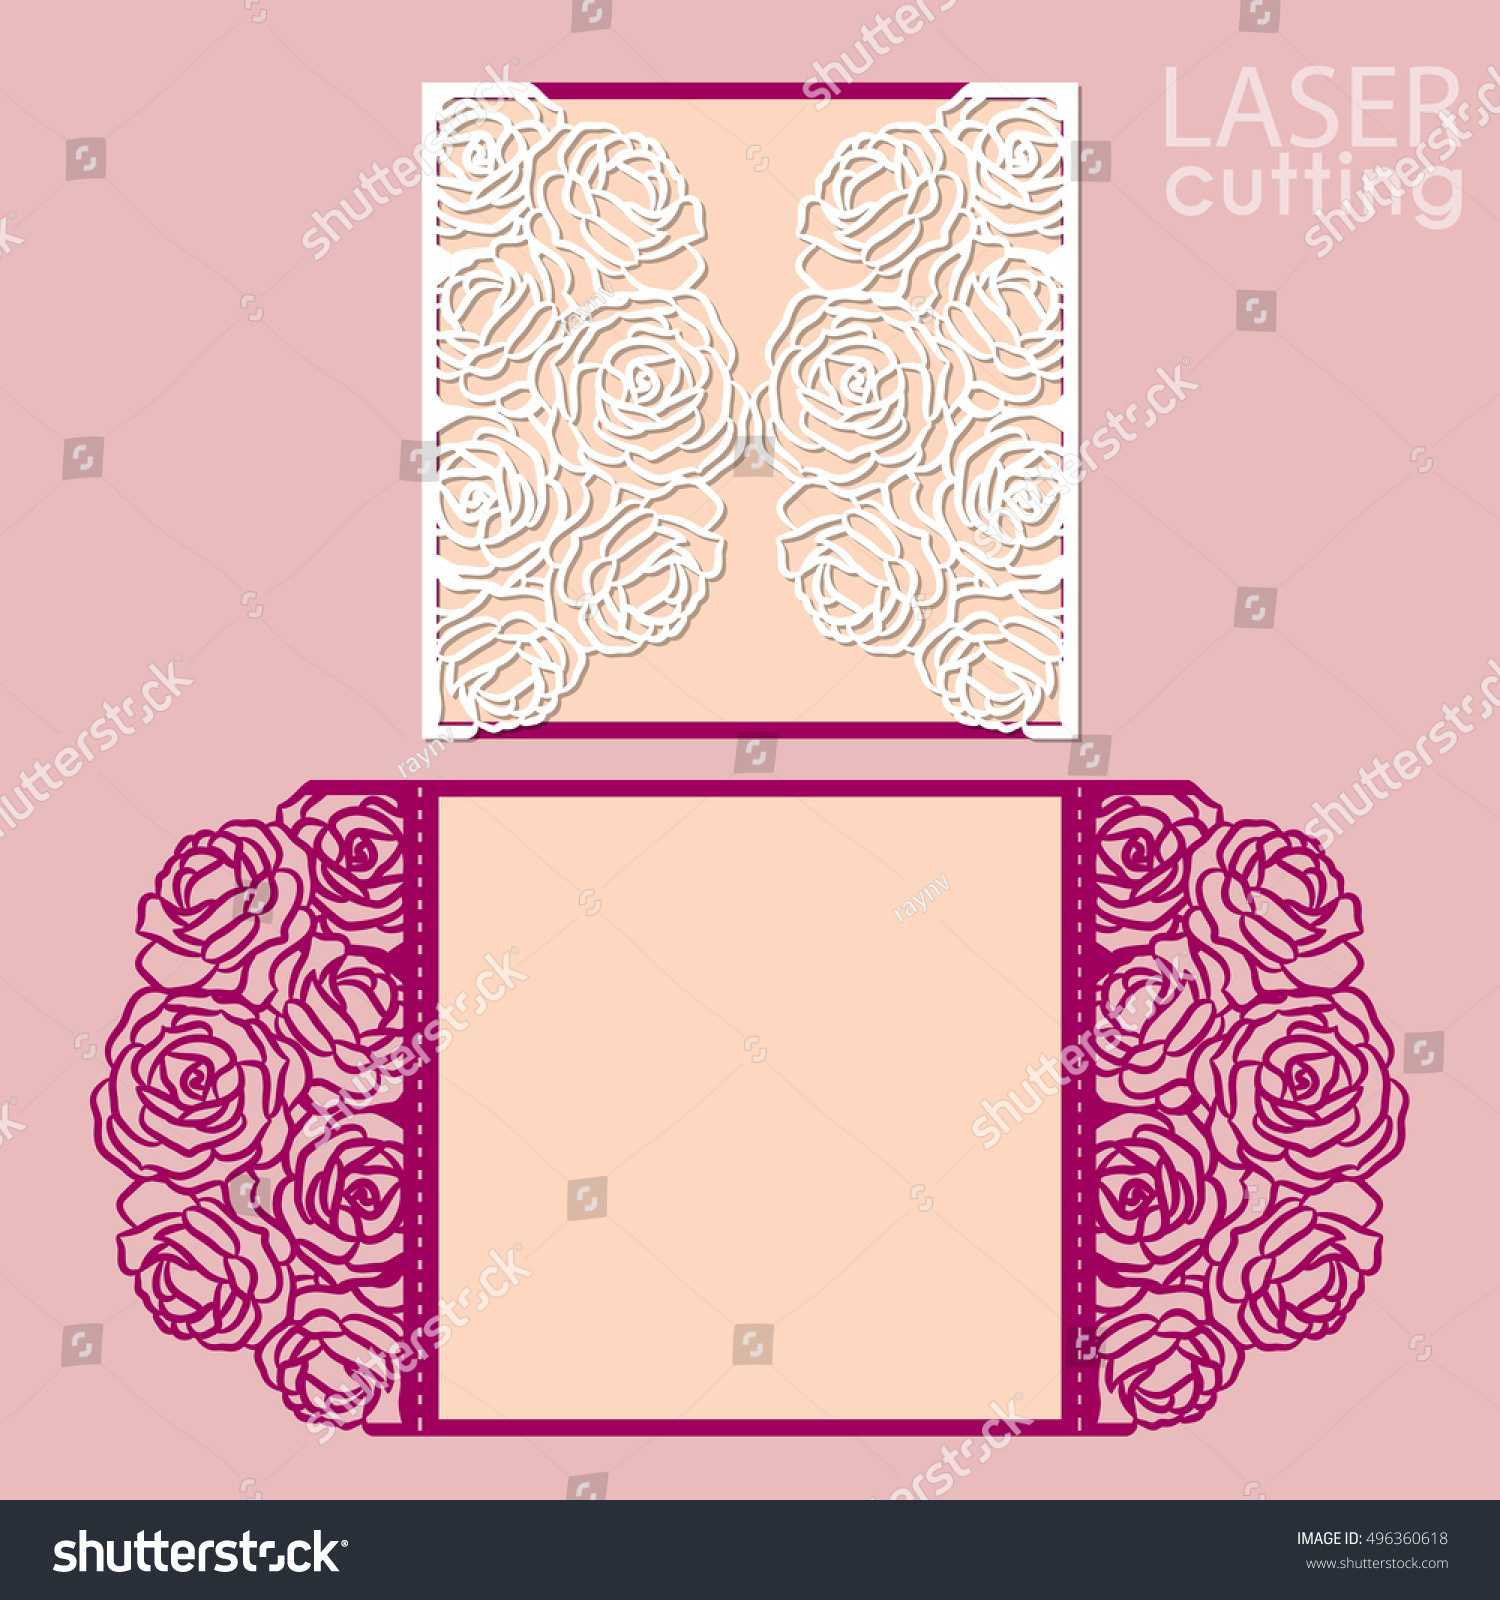 Laser Cut Wedding Invitation Card Template Stock Vector Inside Fold Out Card Template